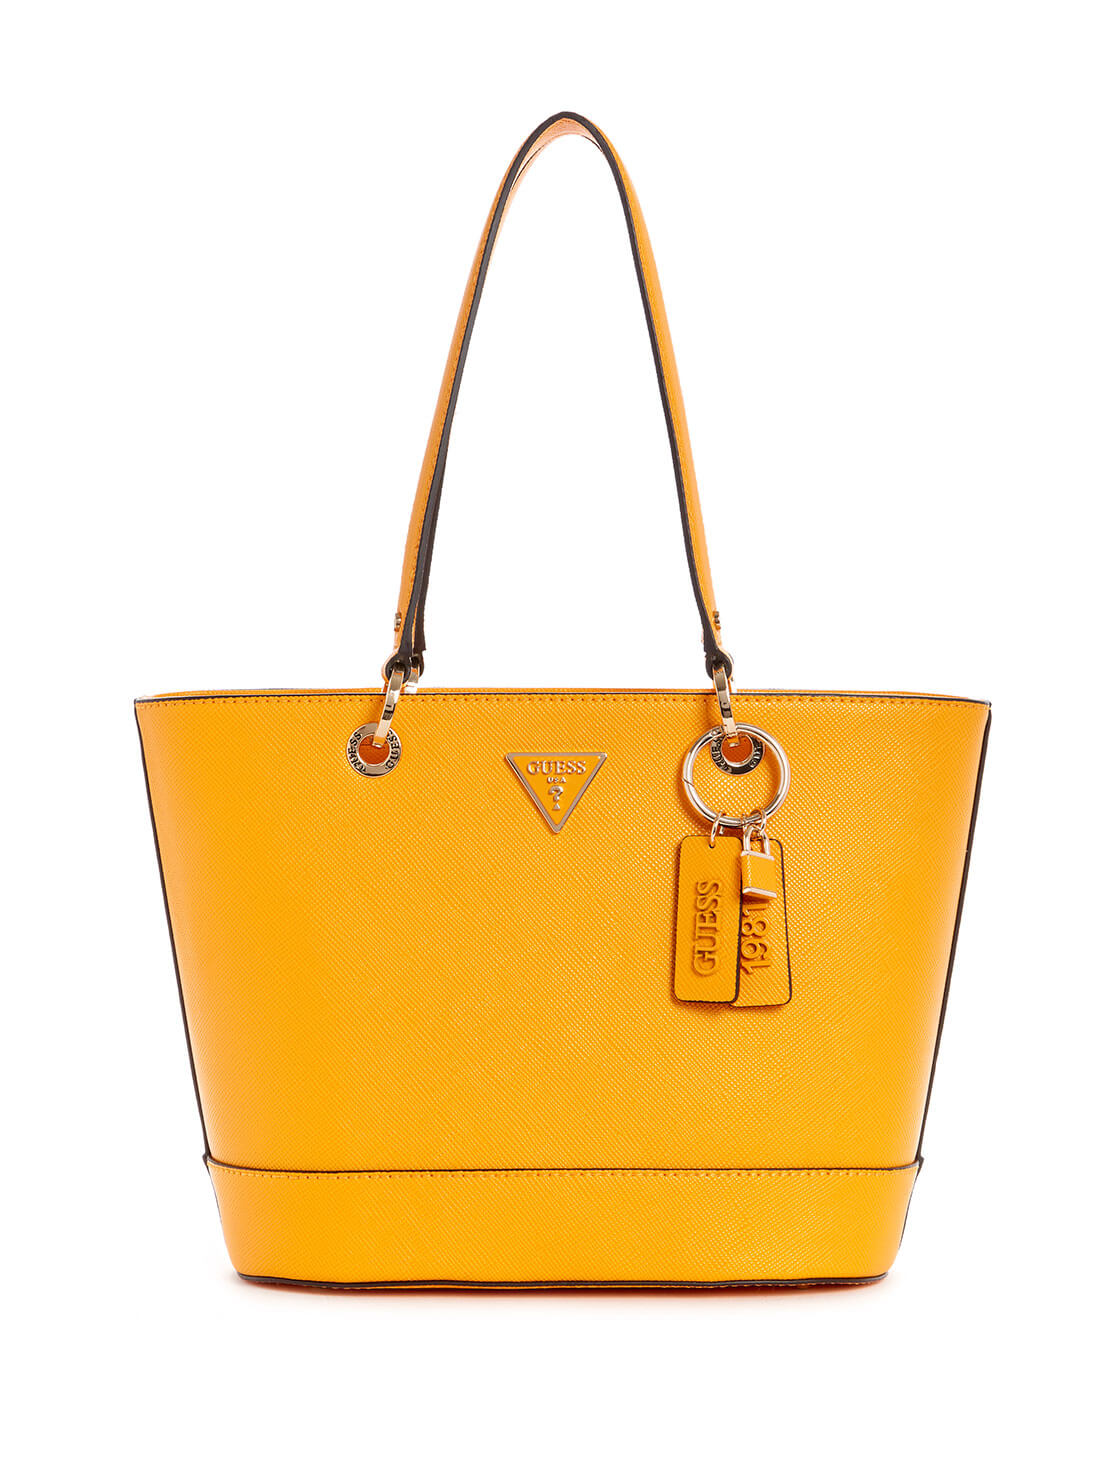 GUESS Womens Mango Orange Noelle Small Elite Tote Bag ZG787922 Front View